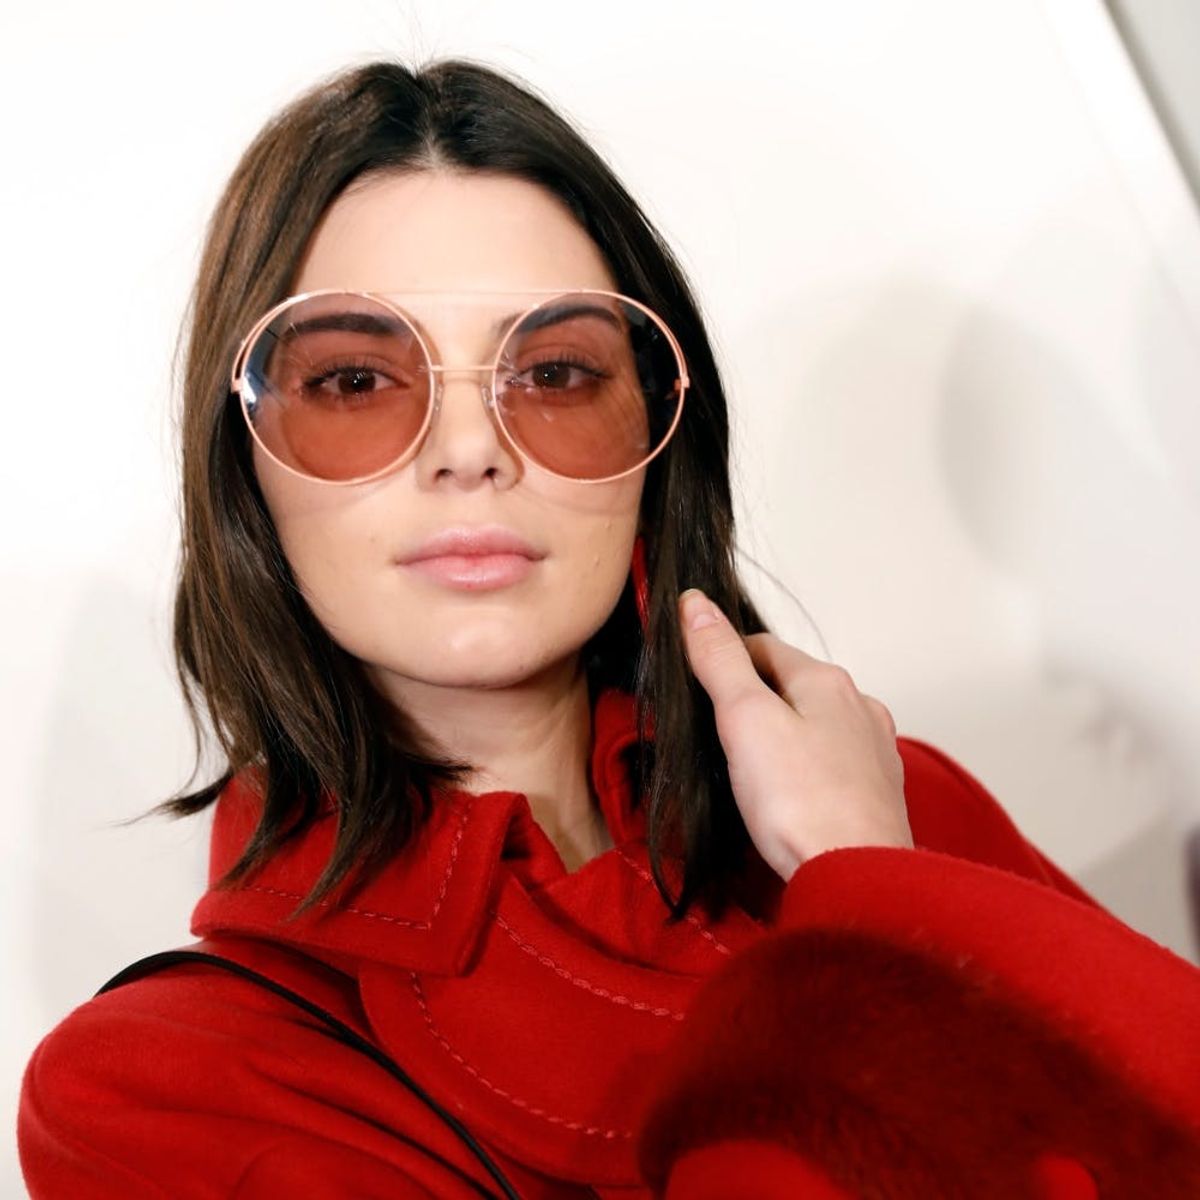 Kendall Jenner Has Been Robbed of $200K Worth of Jewelry